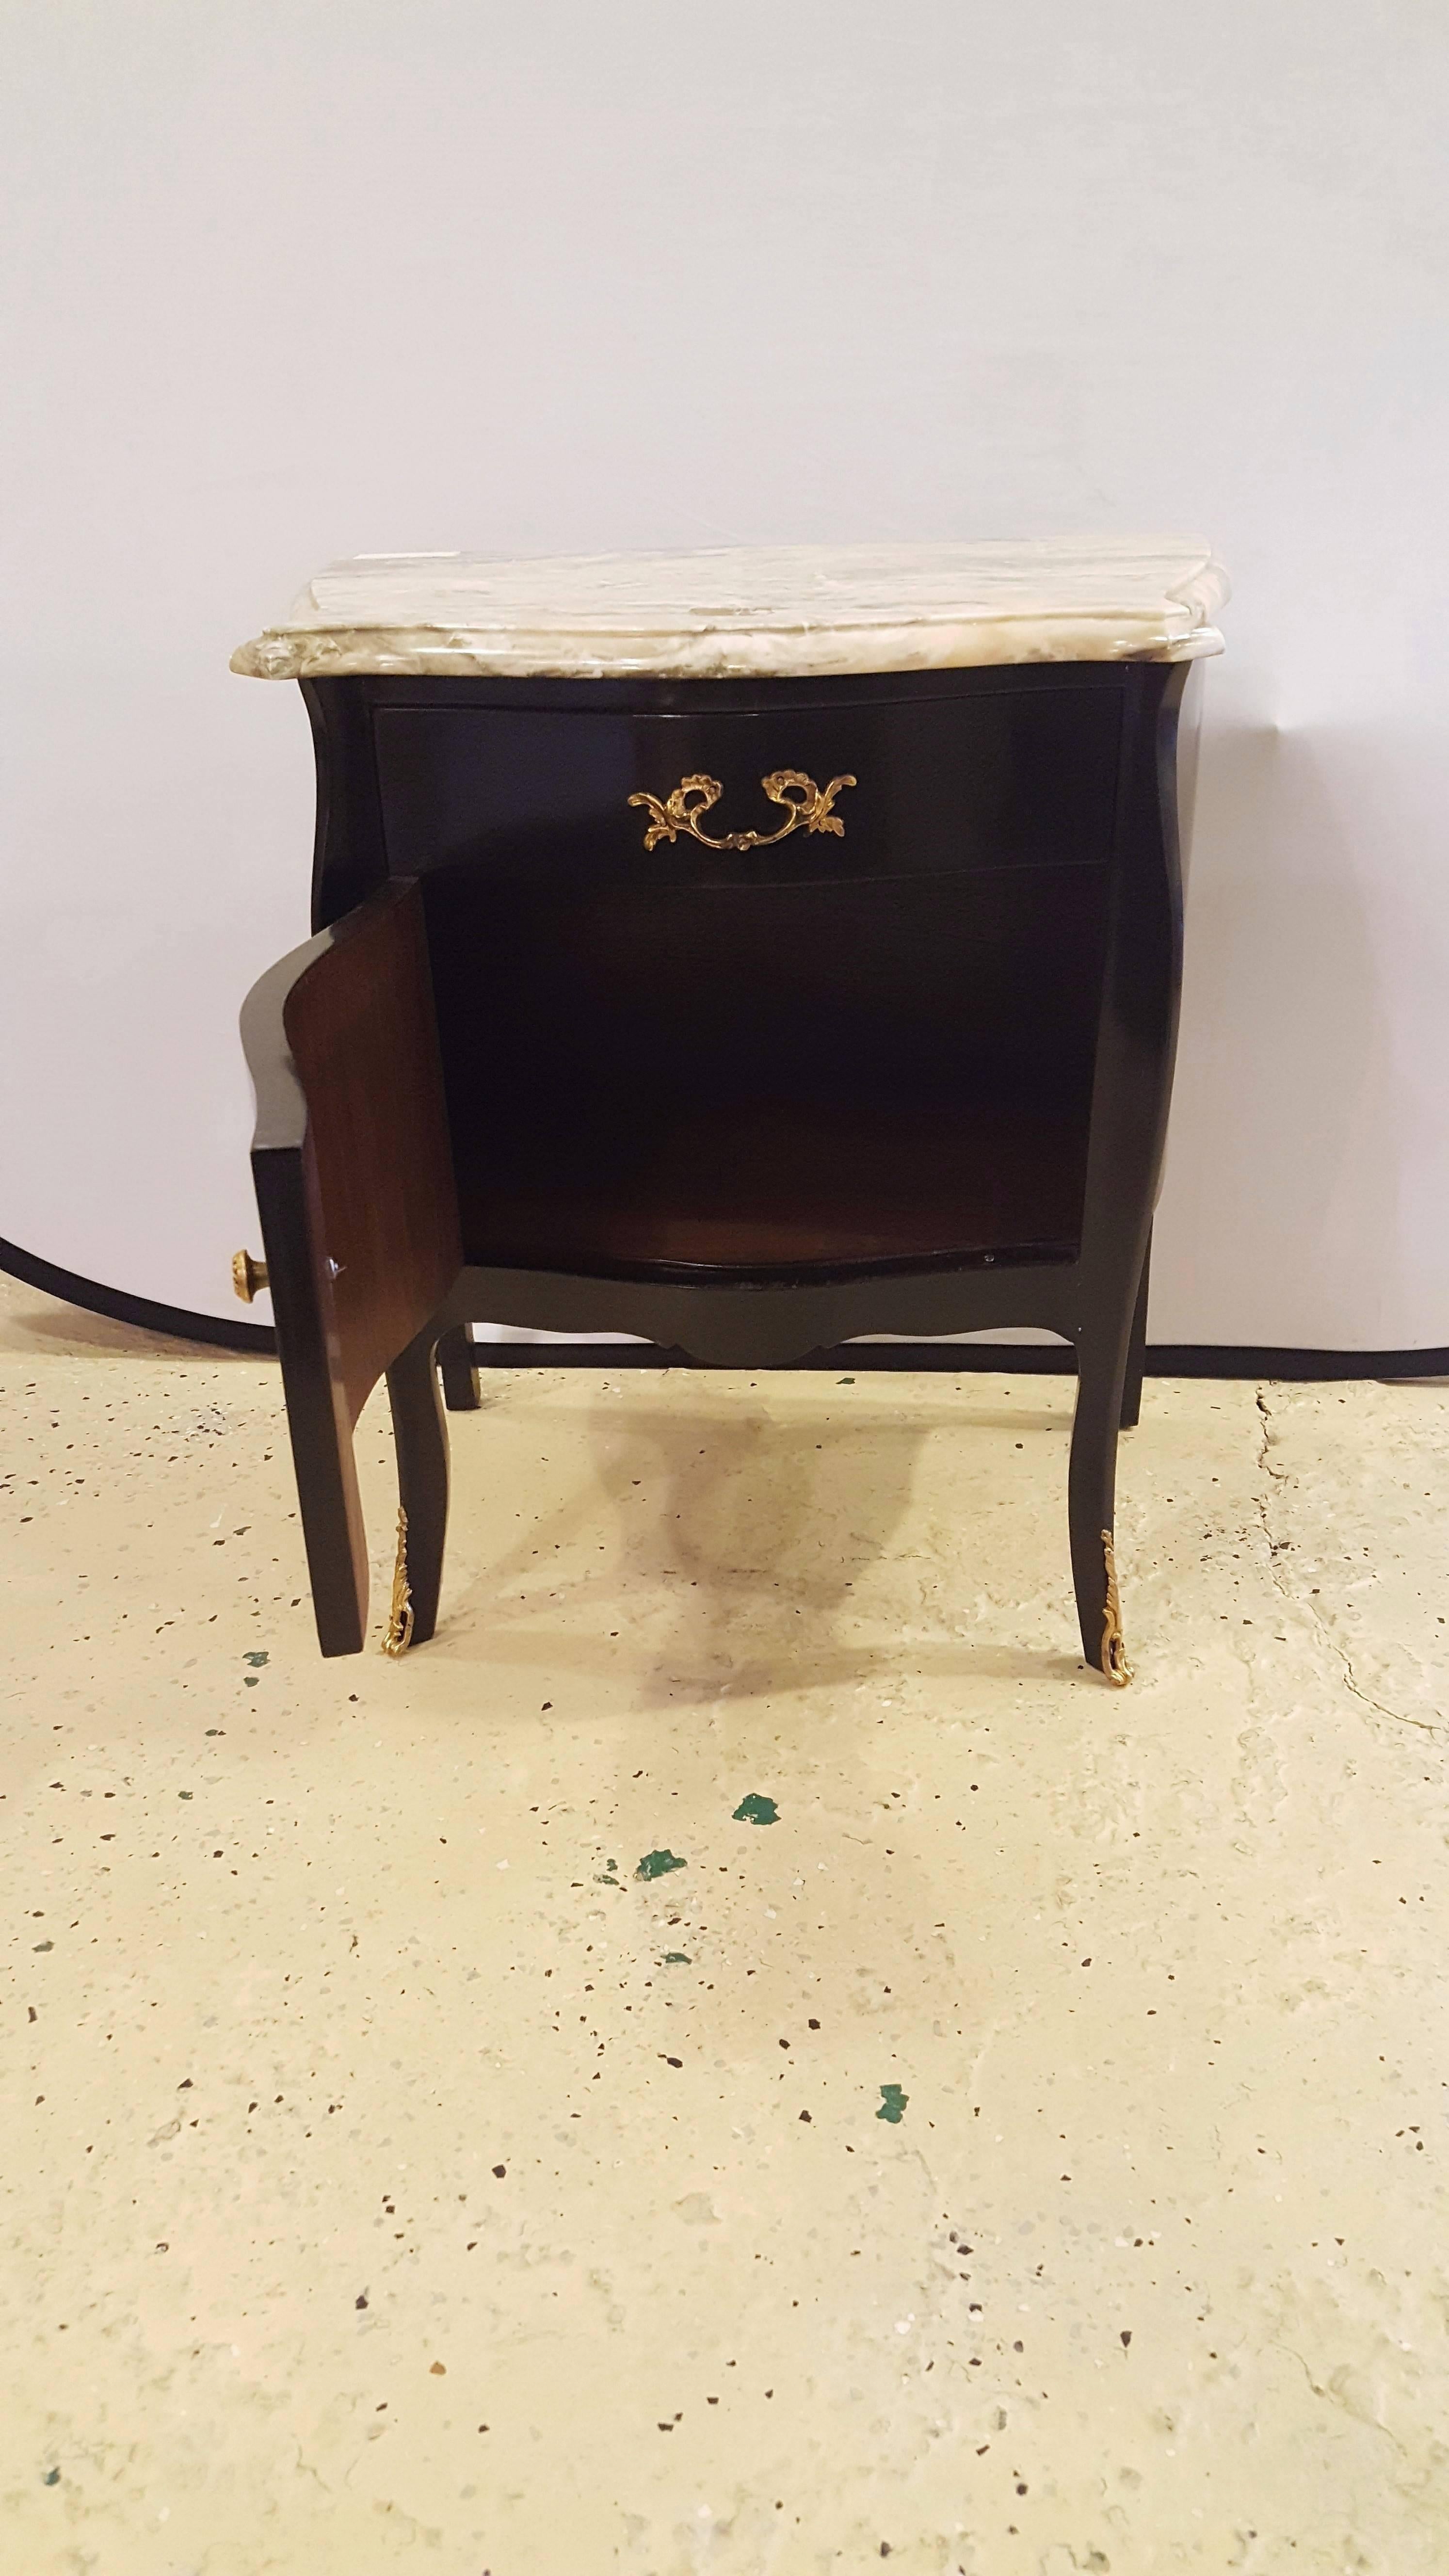 Pair of Hollywood Regency Style Ebonized Marble-Top Nightstands / End Tables 1